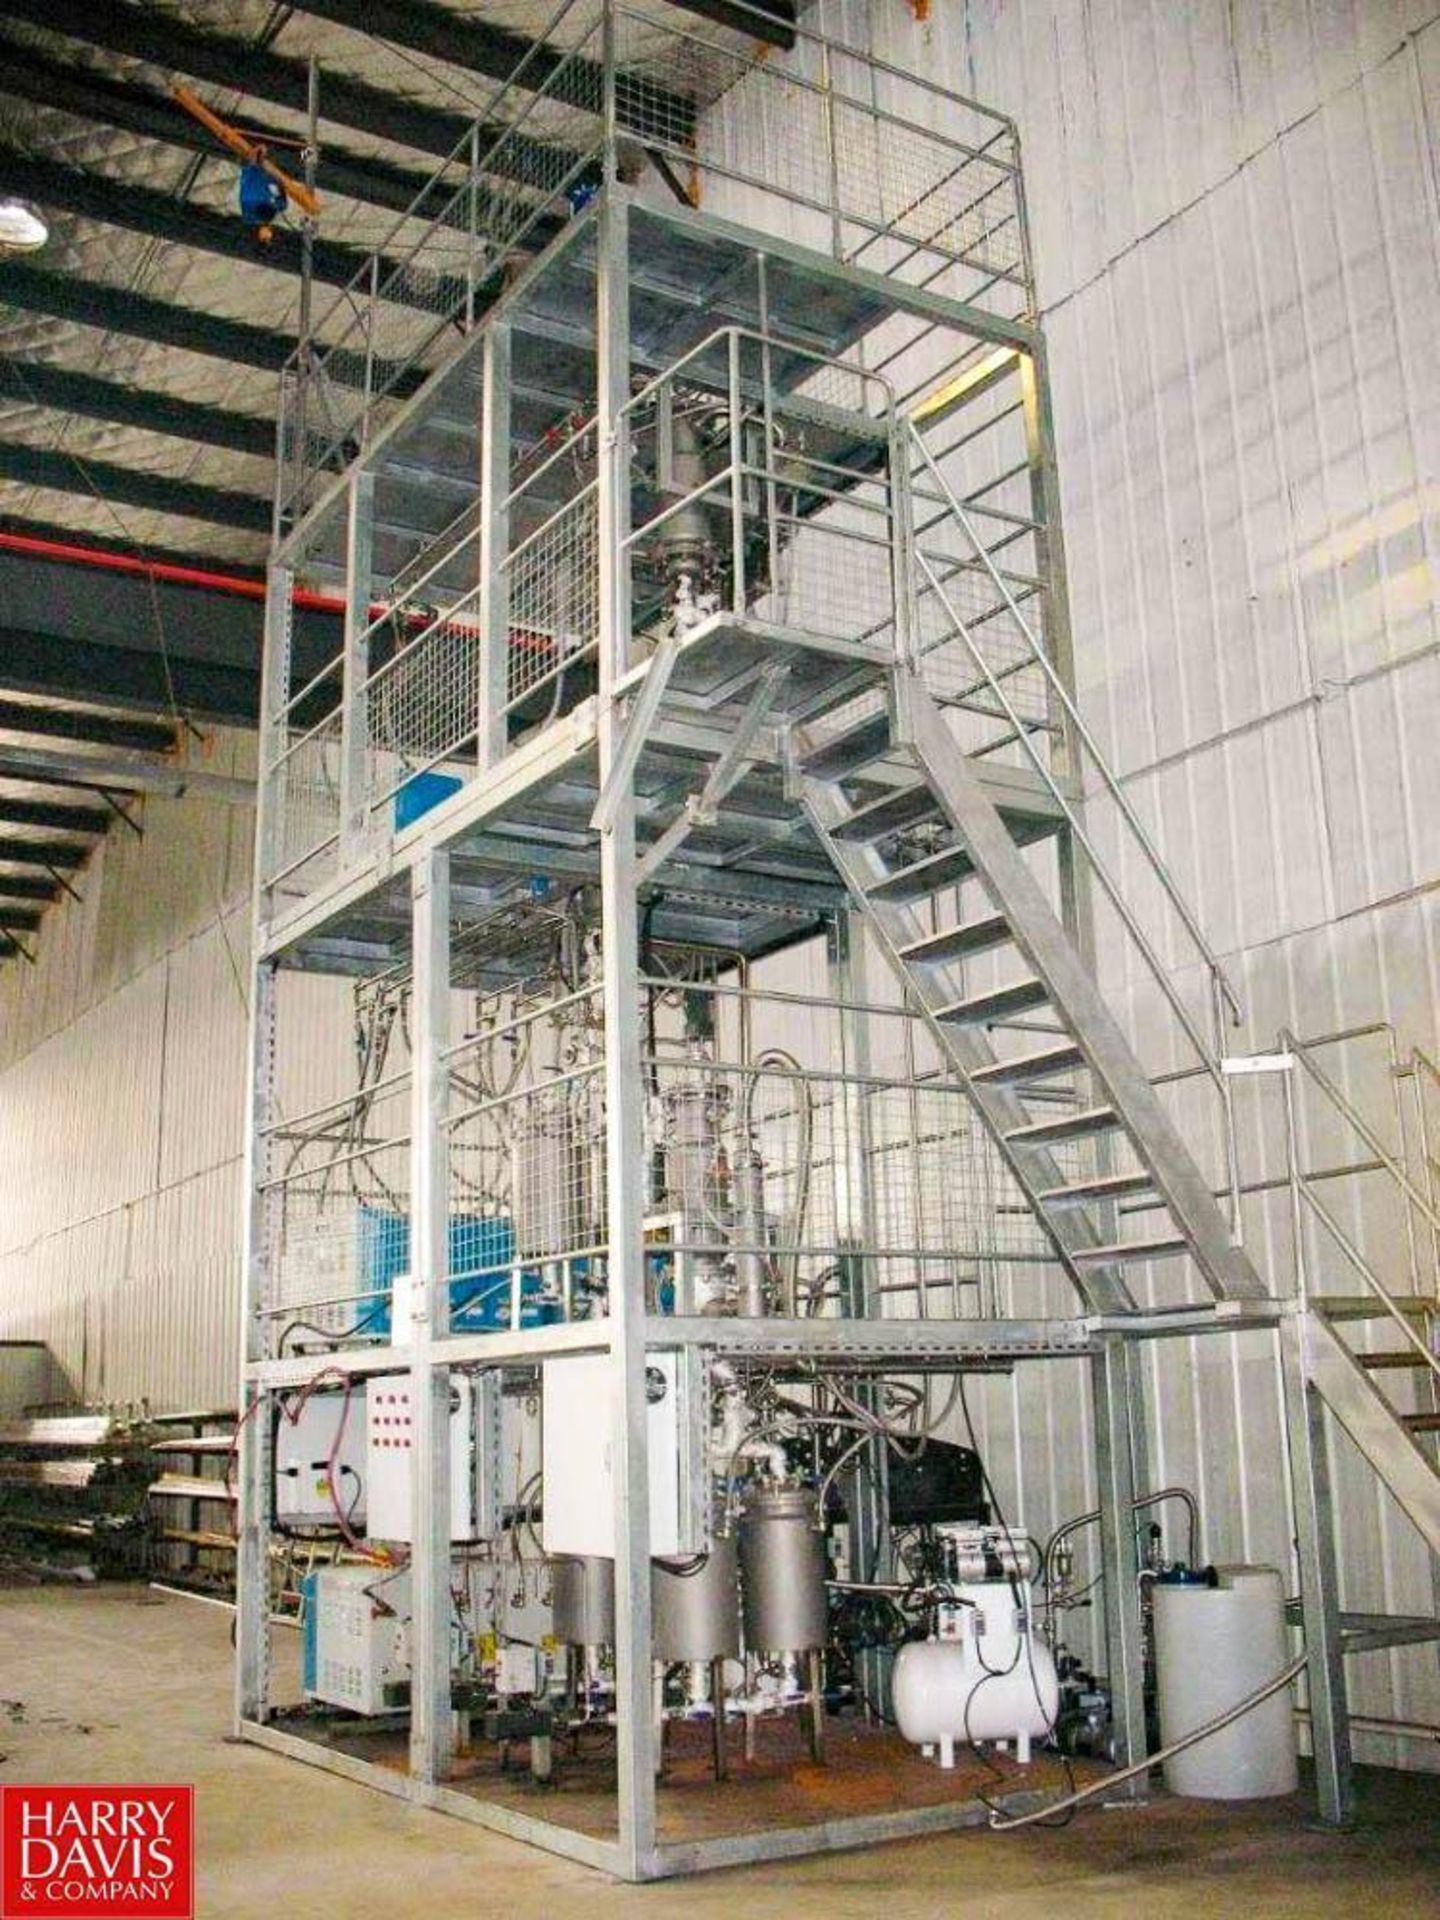 NEW 15 Kilo/Hour 3-Stage Short Path Distillation System, Equipment Type: DEA-8/16serie - Image 2 of 3